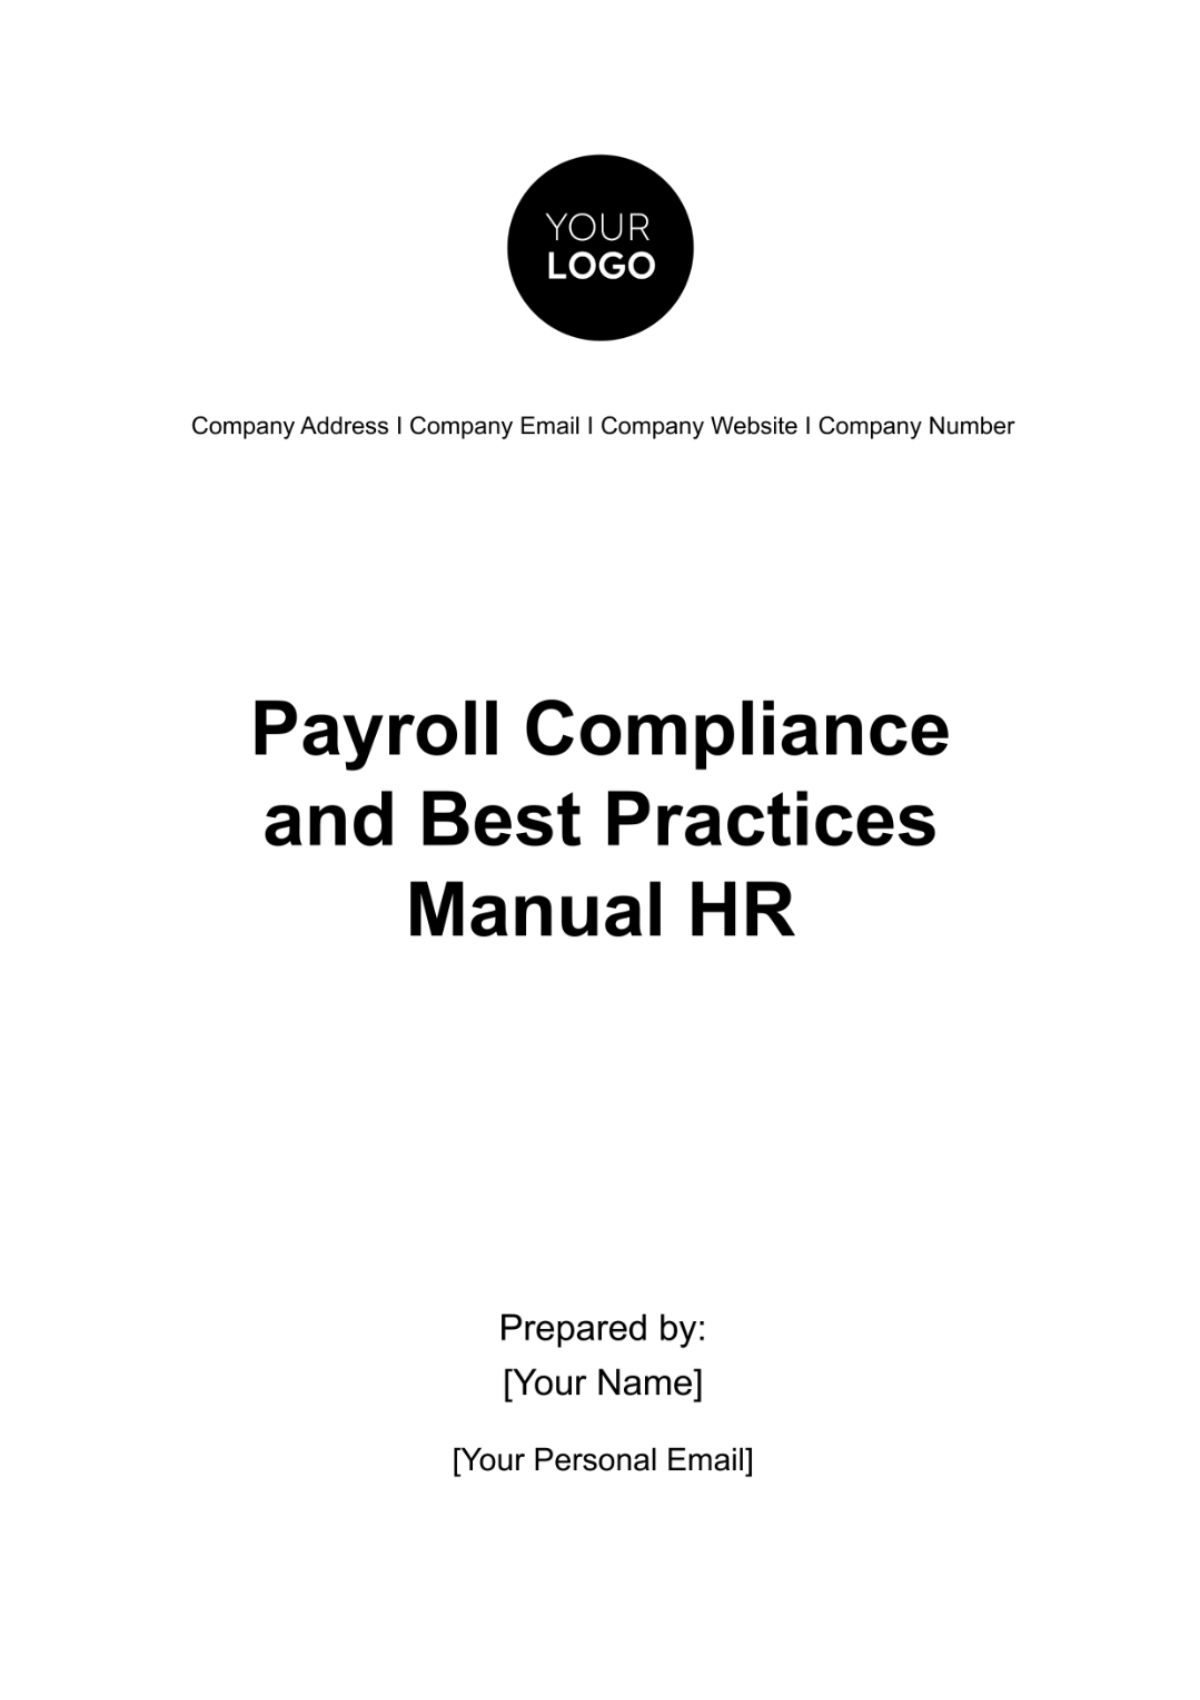 Payroll Compliance and Best Practices Manual HR Template